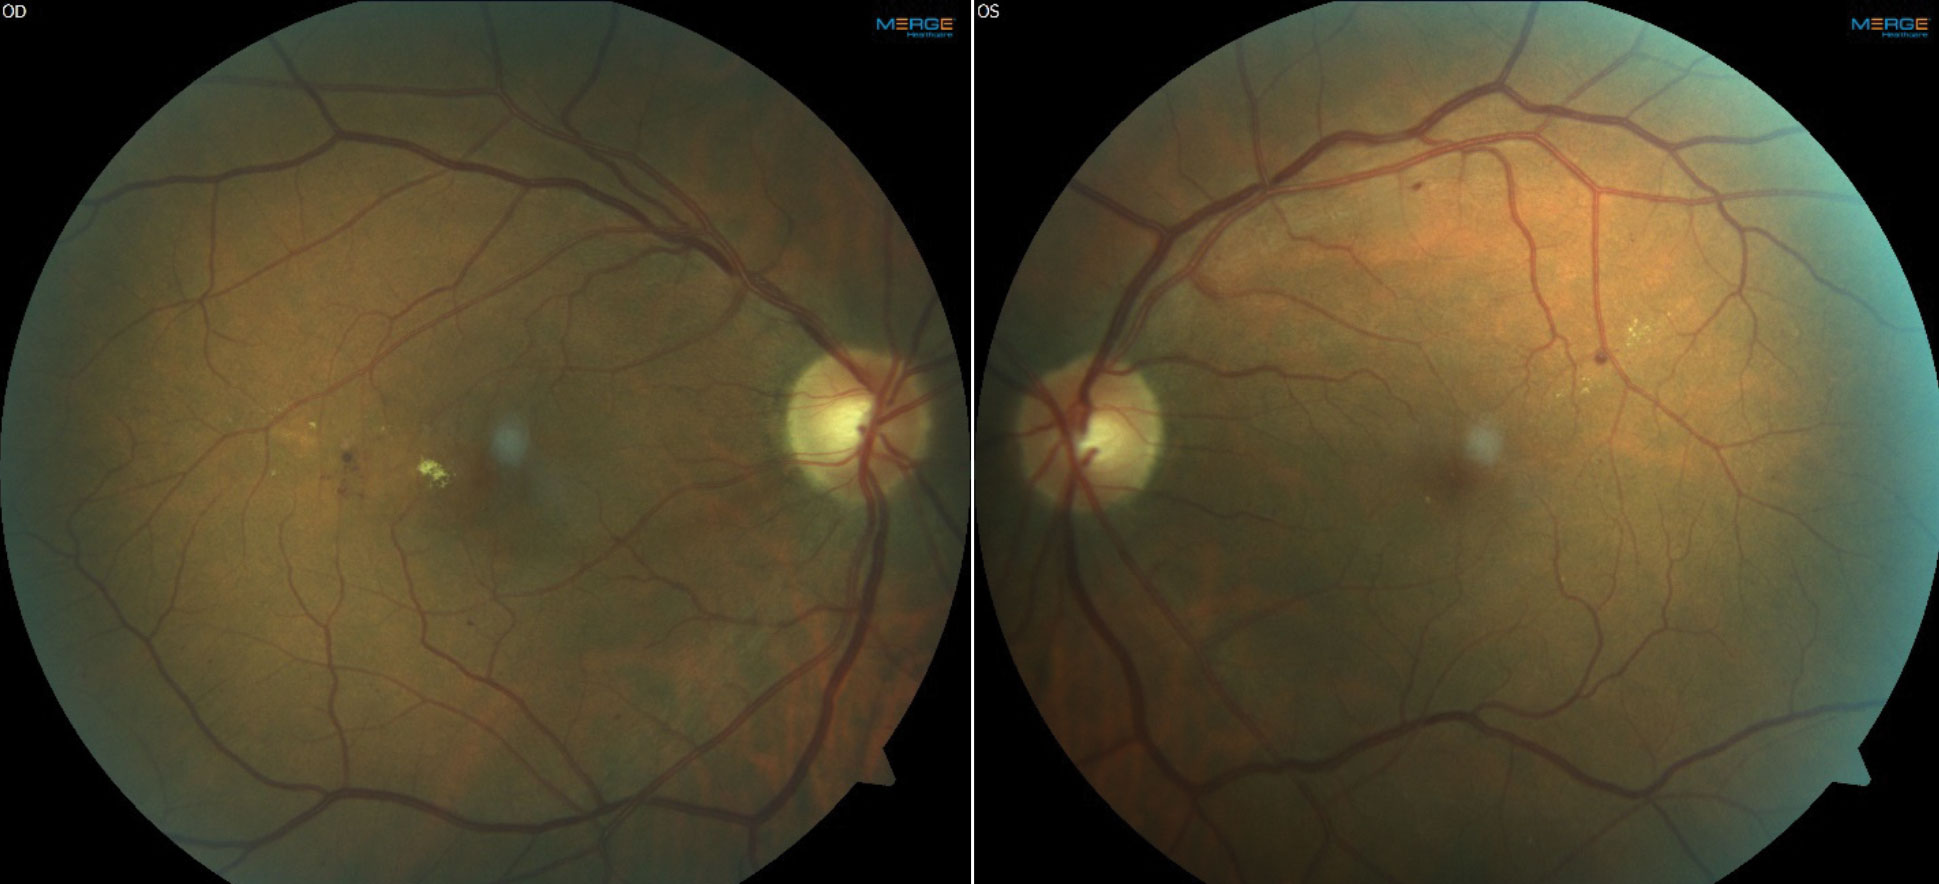 Fundus images and OCT of a patient with moderate NPDR OU and CI-DME OD. The patient’s best corrected acuities were 20/25 OD and 20/20 OS. The comanaging retina specialist elected to monitor the CI-DME OD based on the findings of DRCR Protocol V.